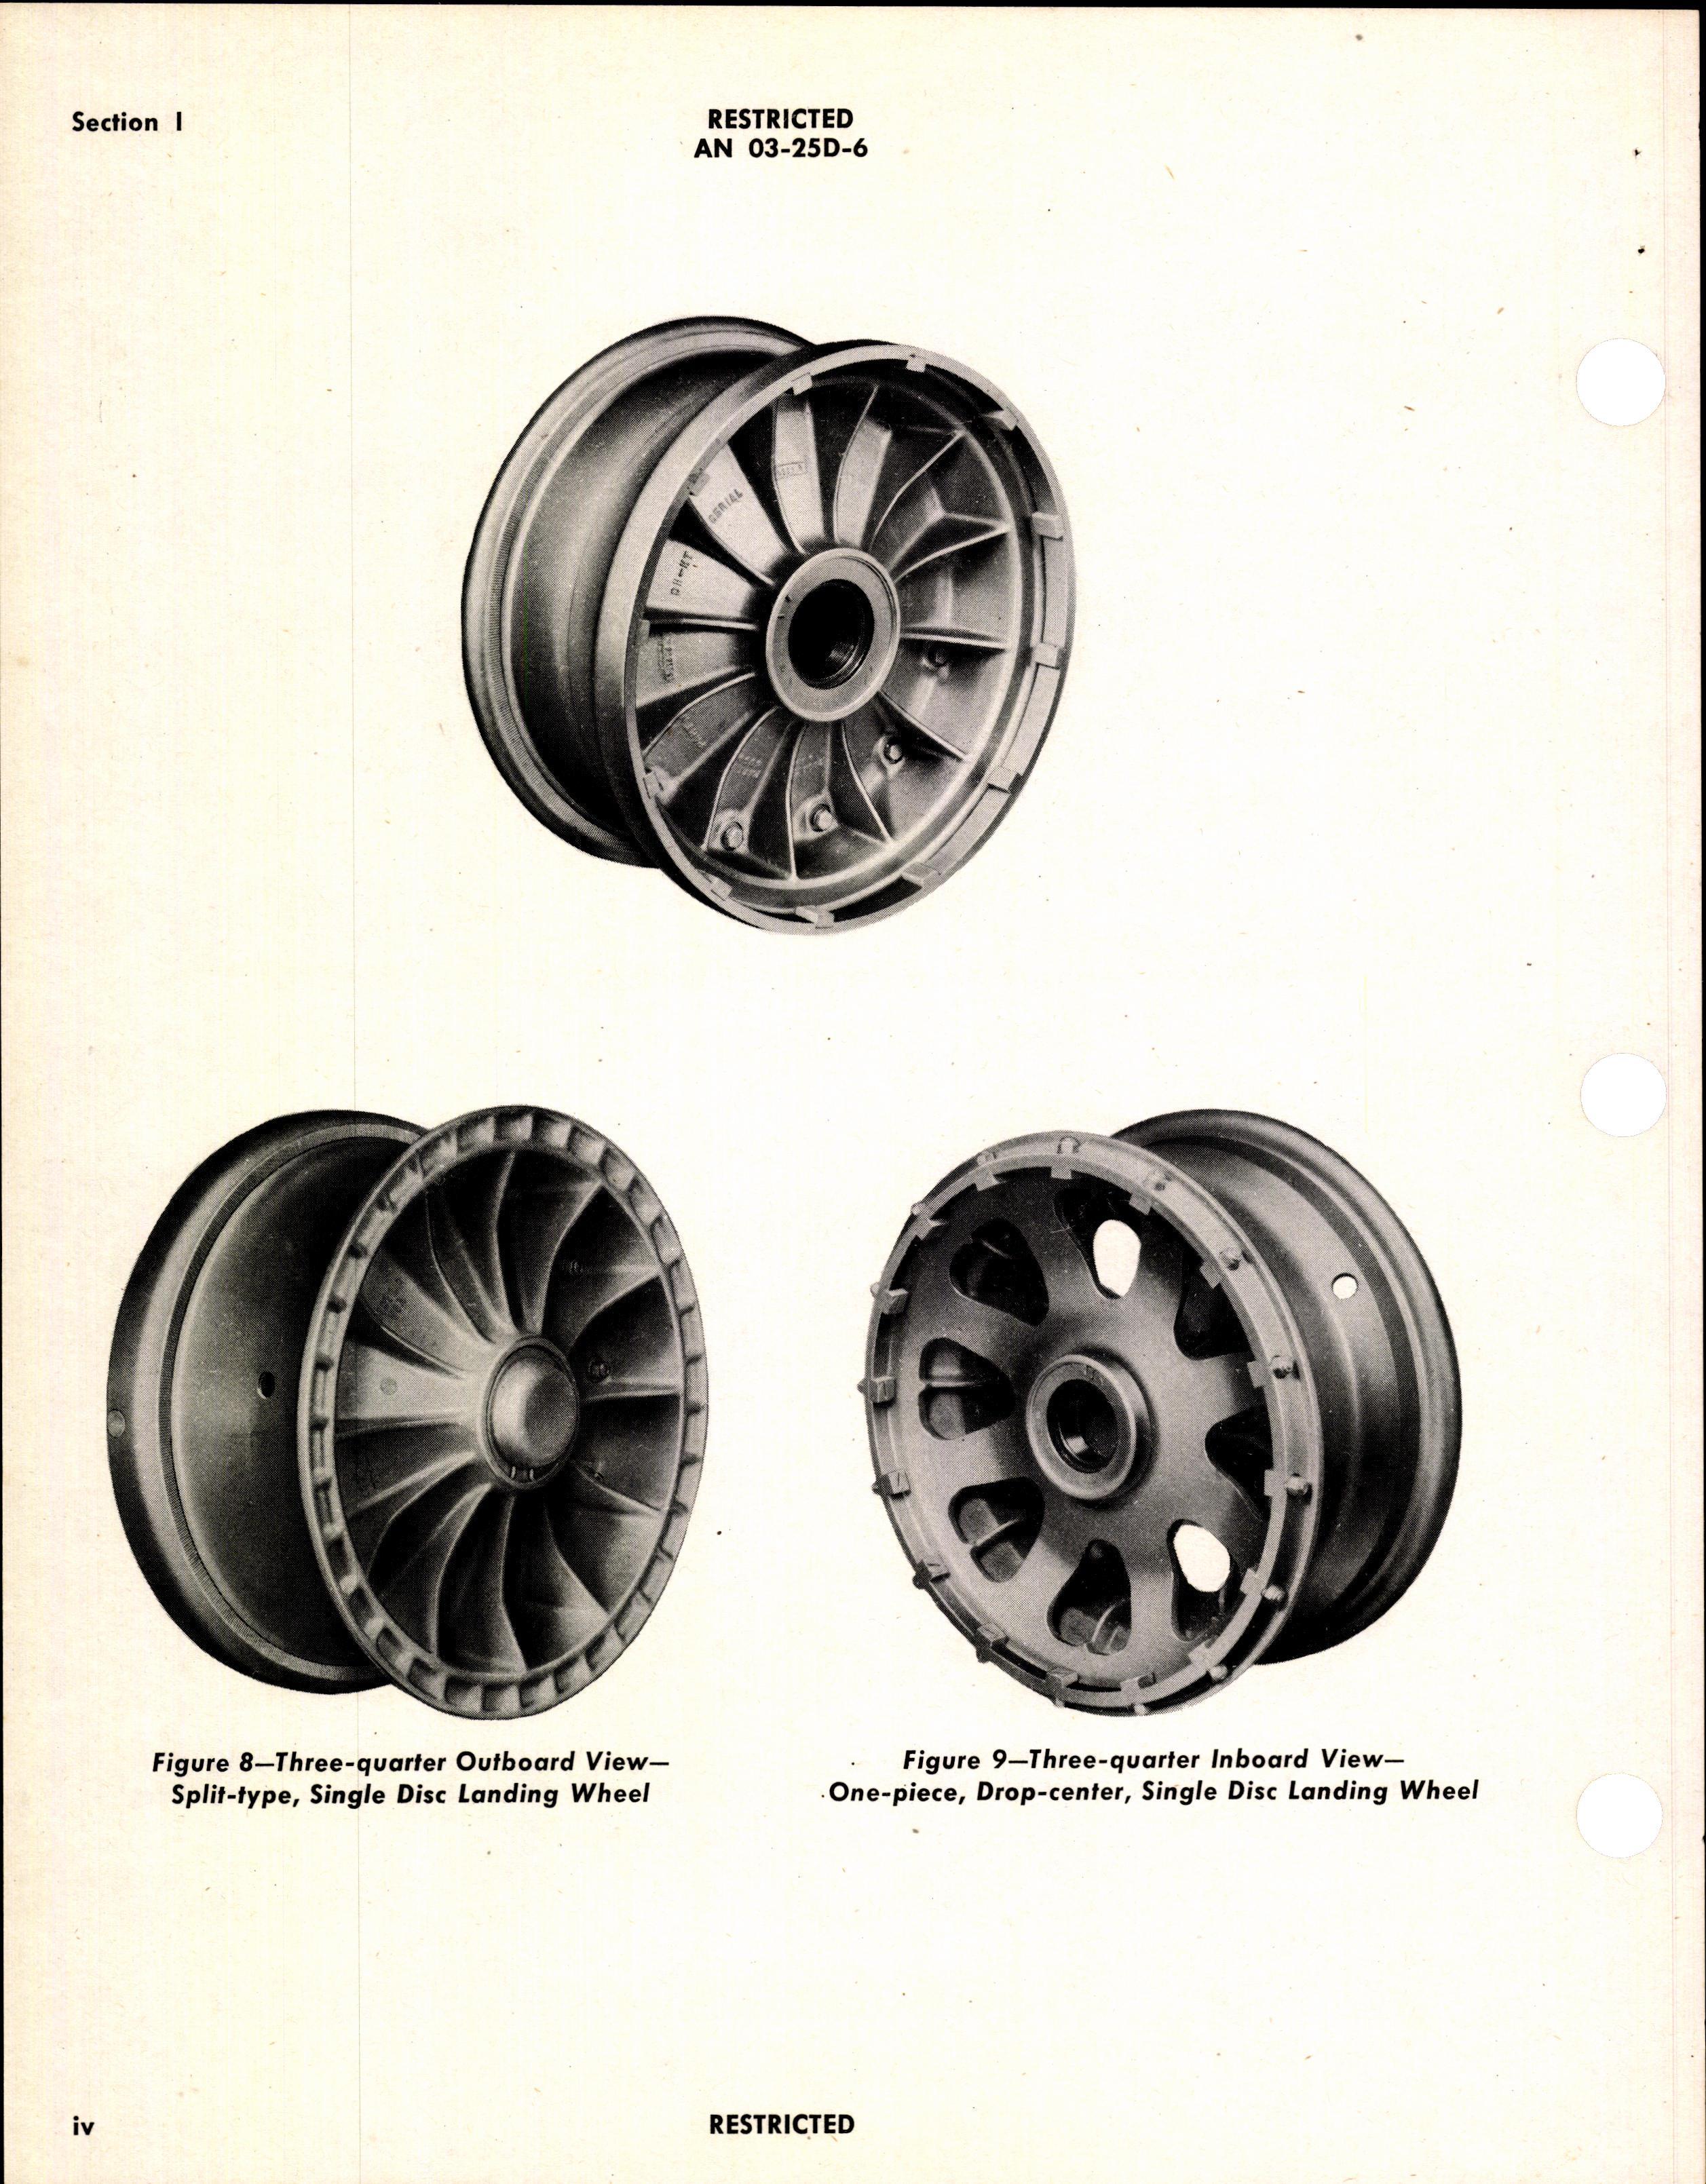 Sample page 6 from AirCorps Library document: Handbook of Instructions with Parts Catalog for Landing Wheels For Use With Single Disc Brakes